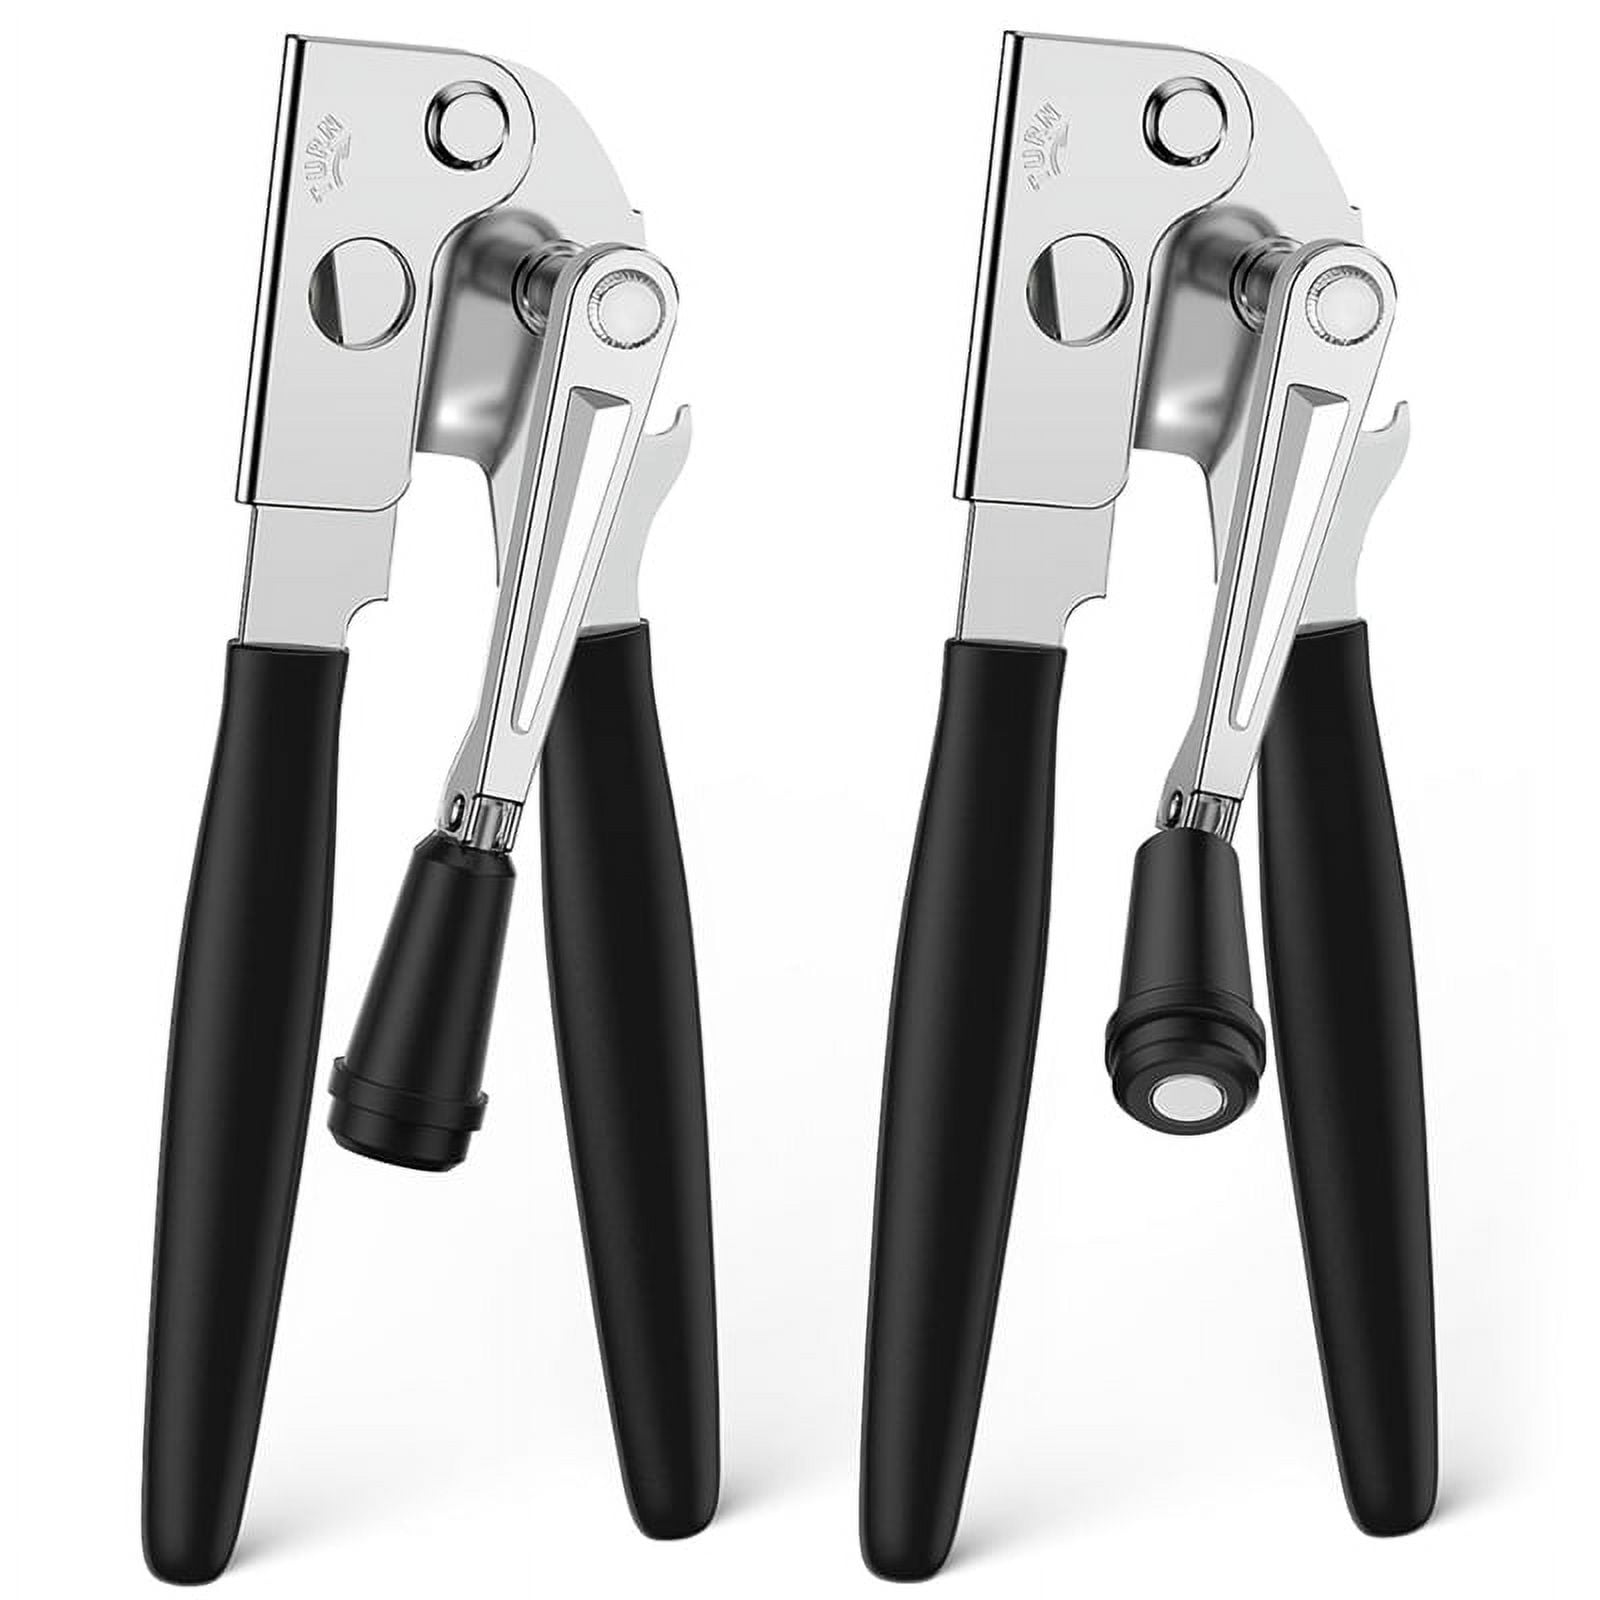 RNAB0BDFM59NP commercial can opener, uhiyee hand crank can opener manual  heavy duty with comfortable extra-long handles, oversized knob, la